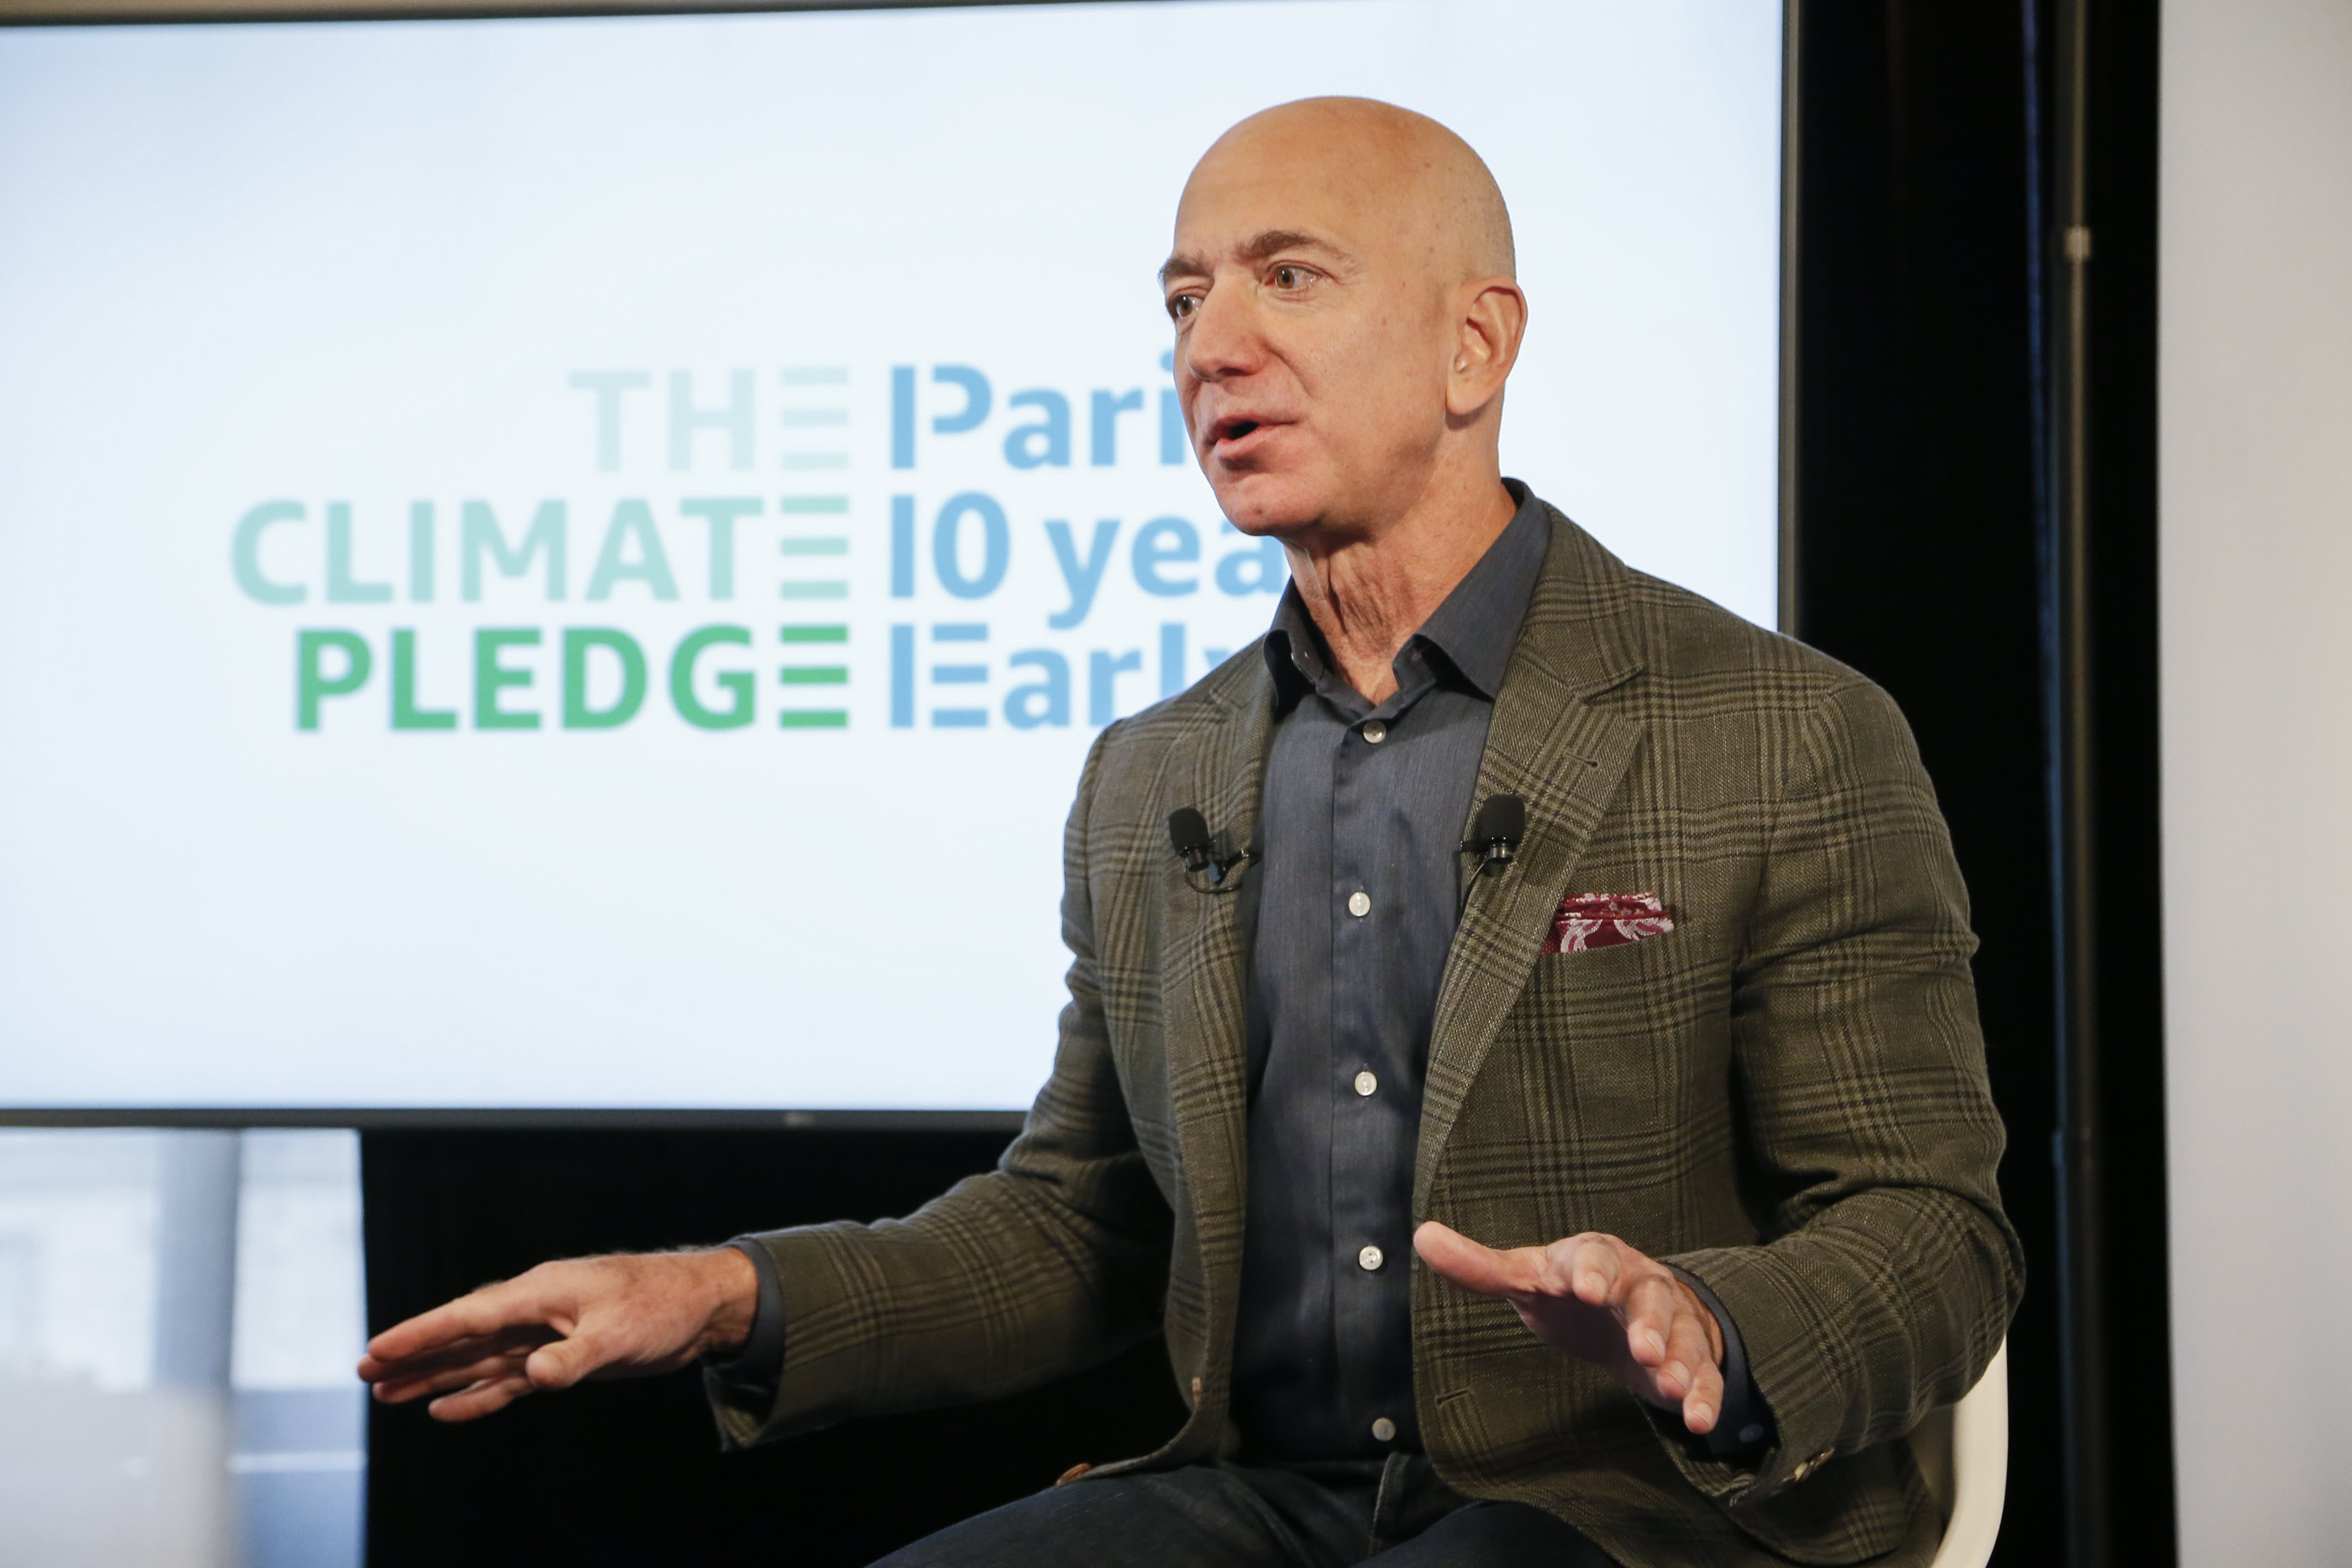 Jeff Bezos Appoints Andrew Steer as CEO of the $ 10 Billion Earth Fund